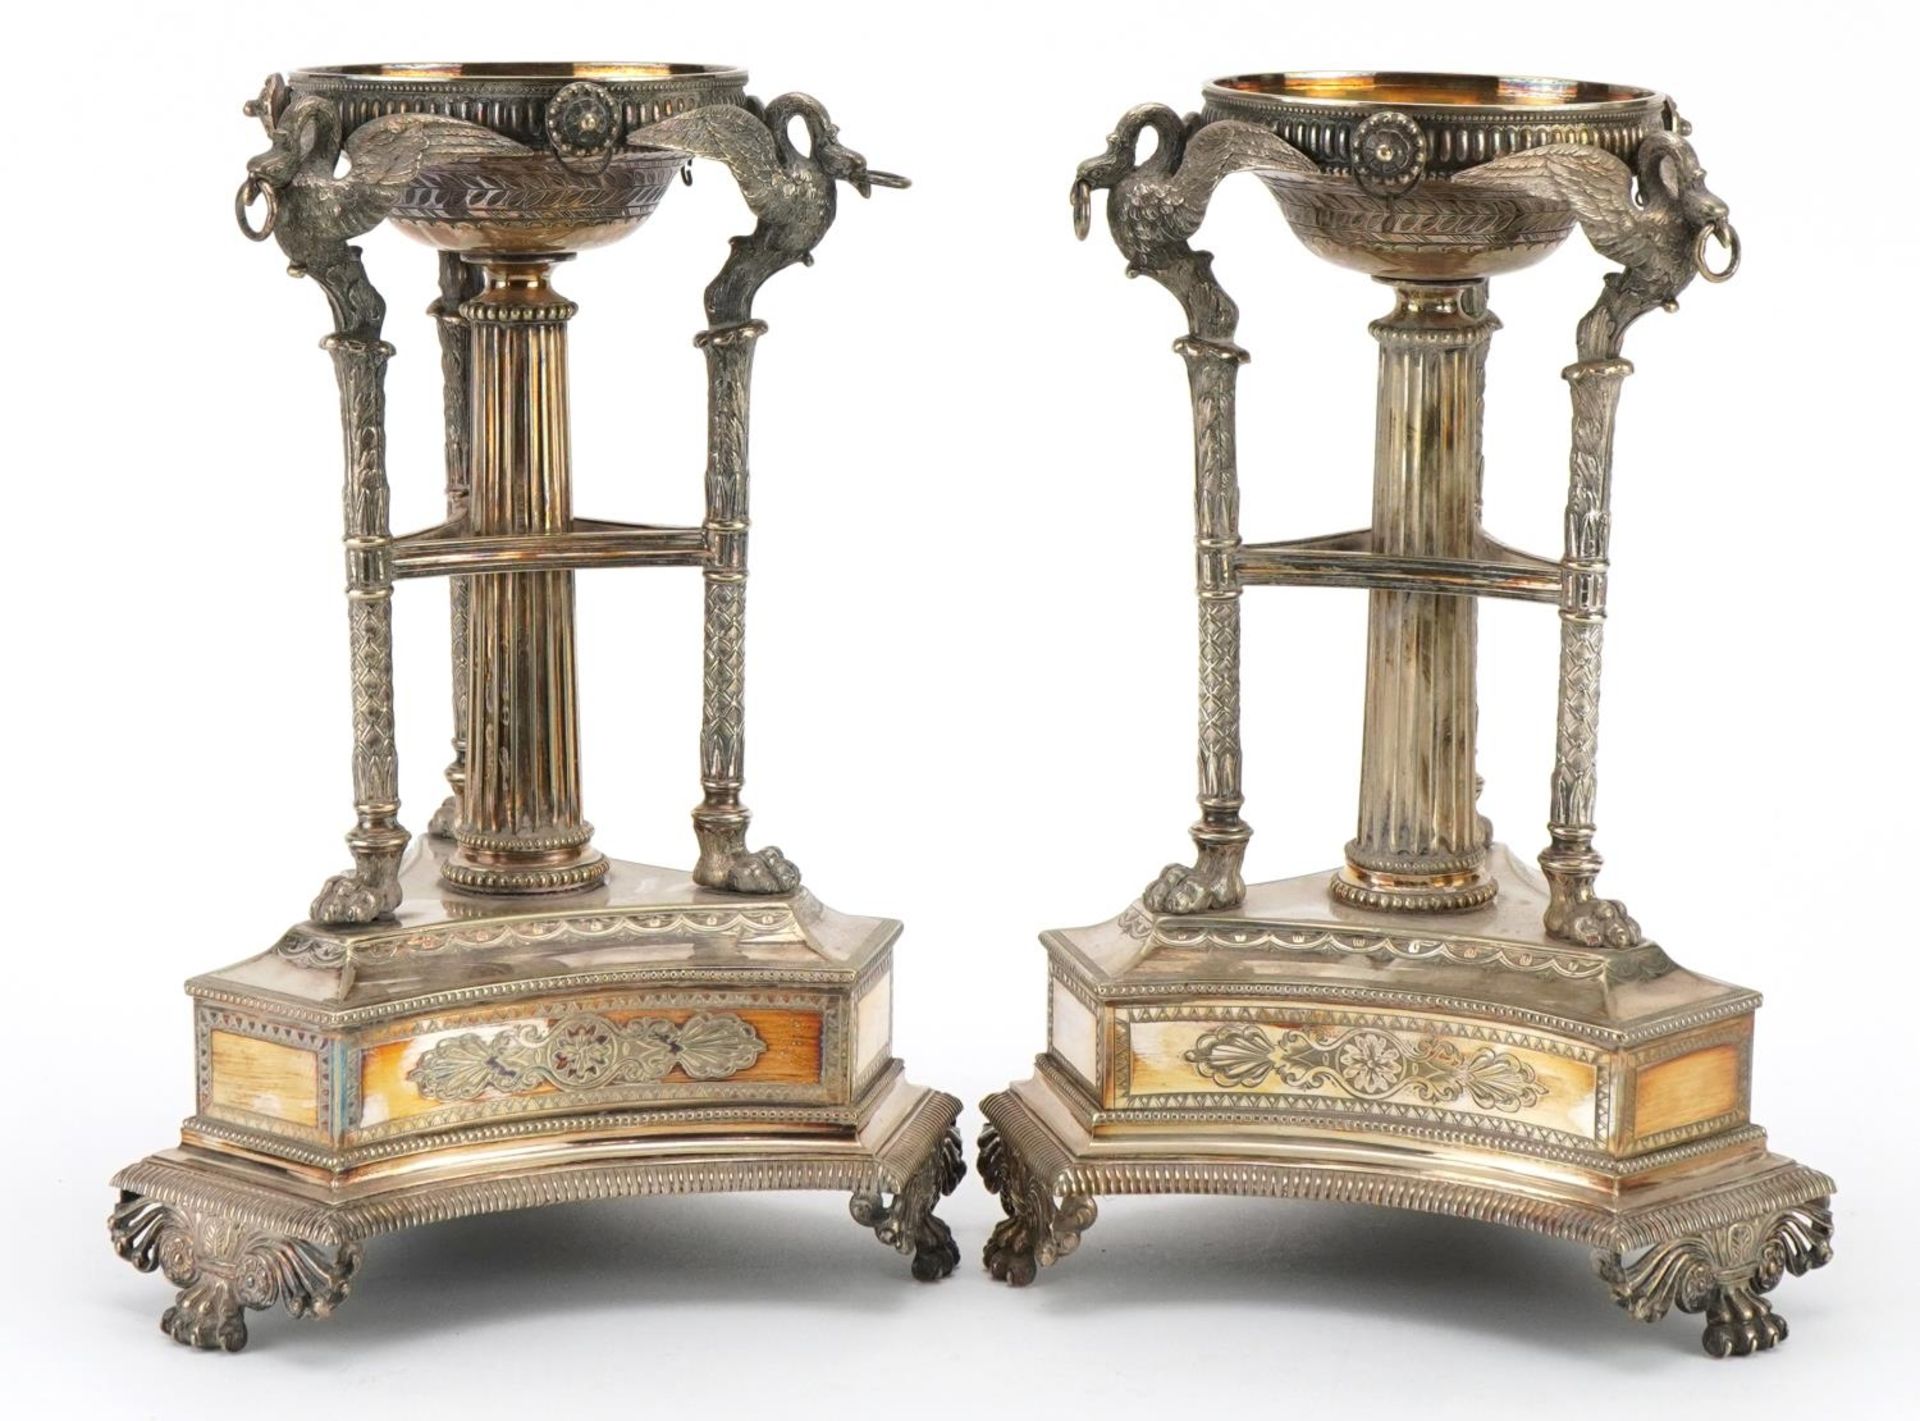 Pair of 19th century Ionic silver plated centrepiece stands with swan and paw supports on triangular